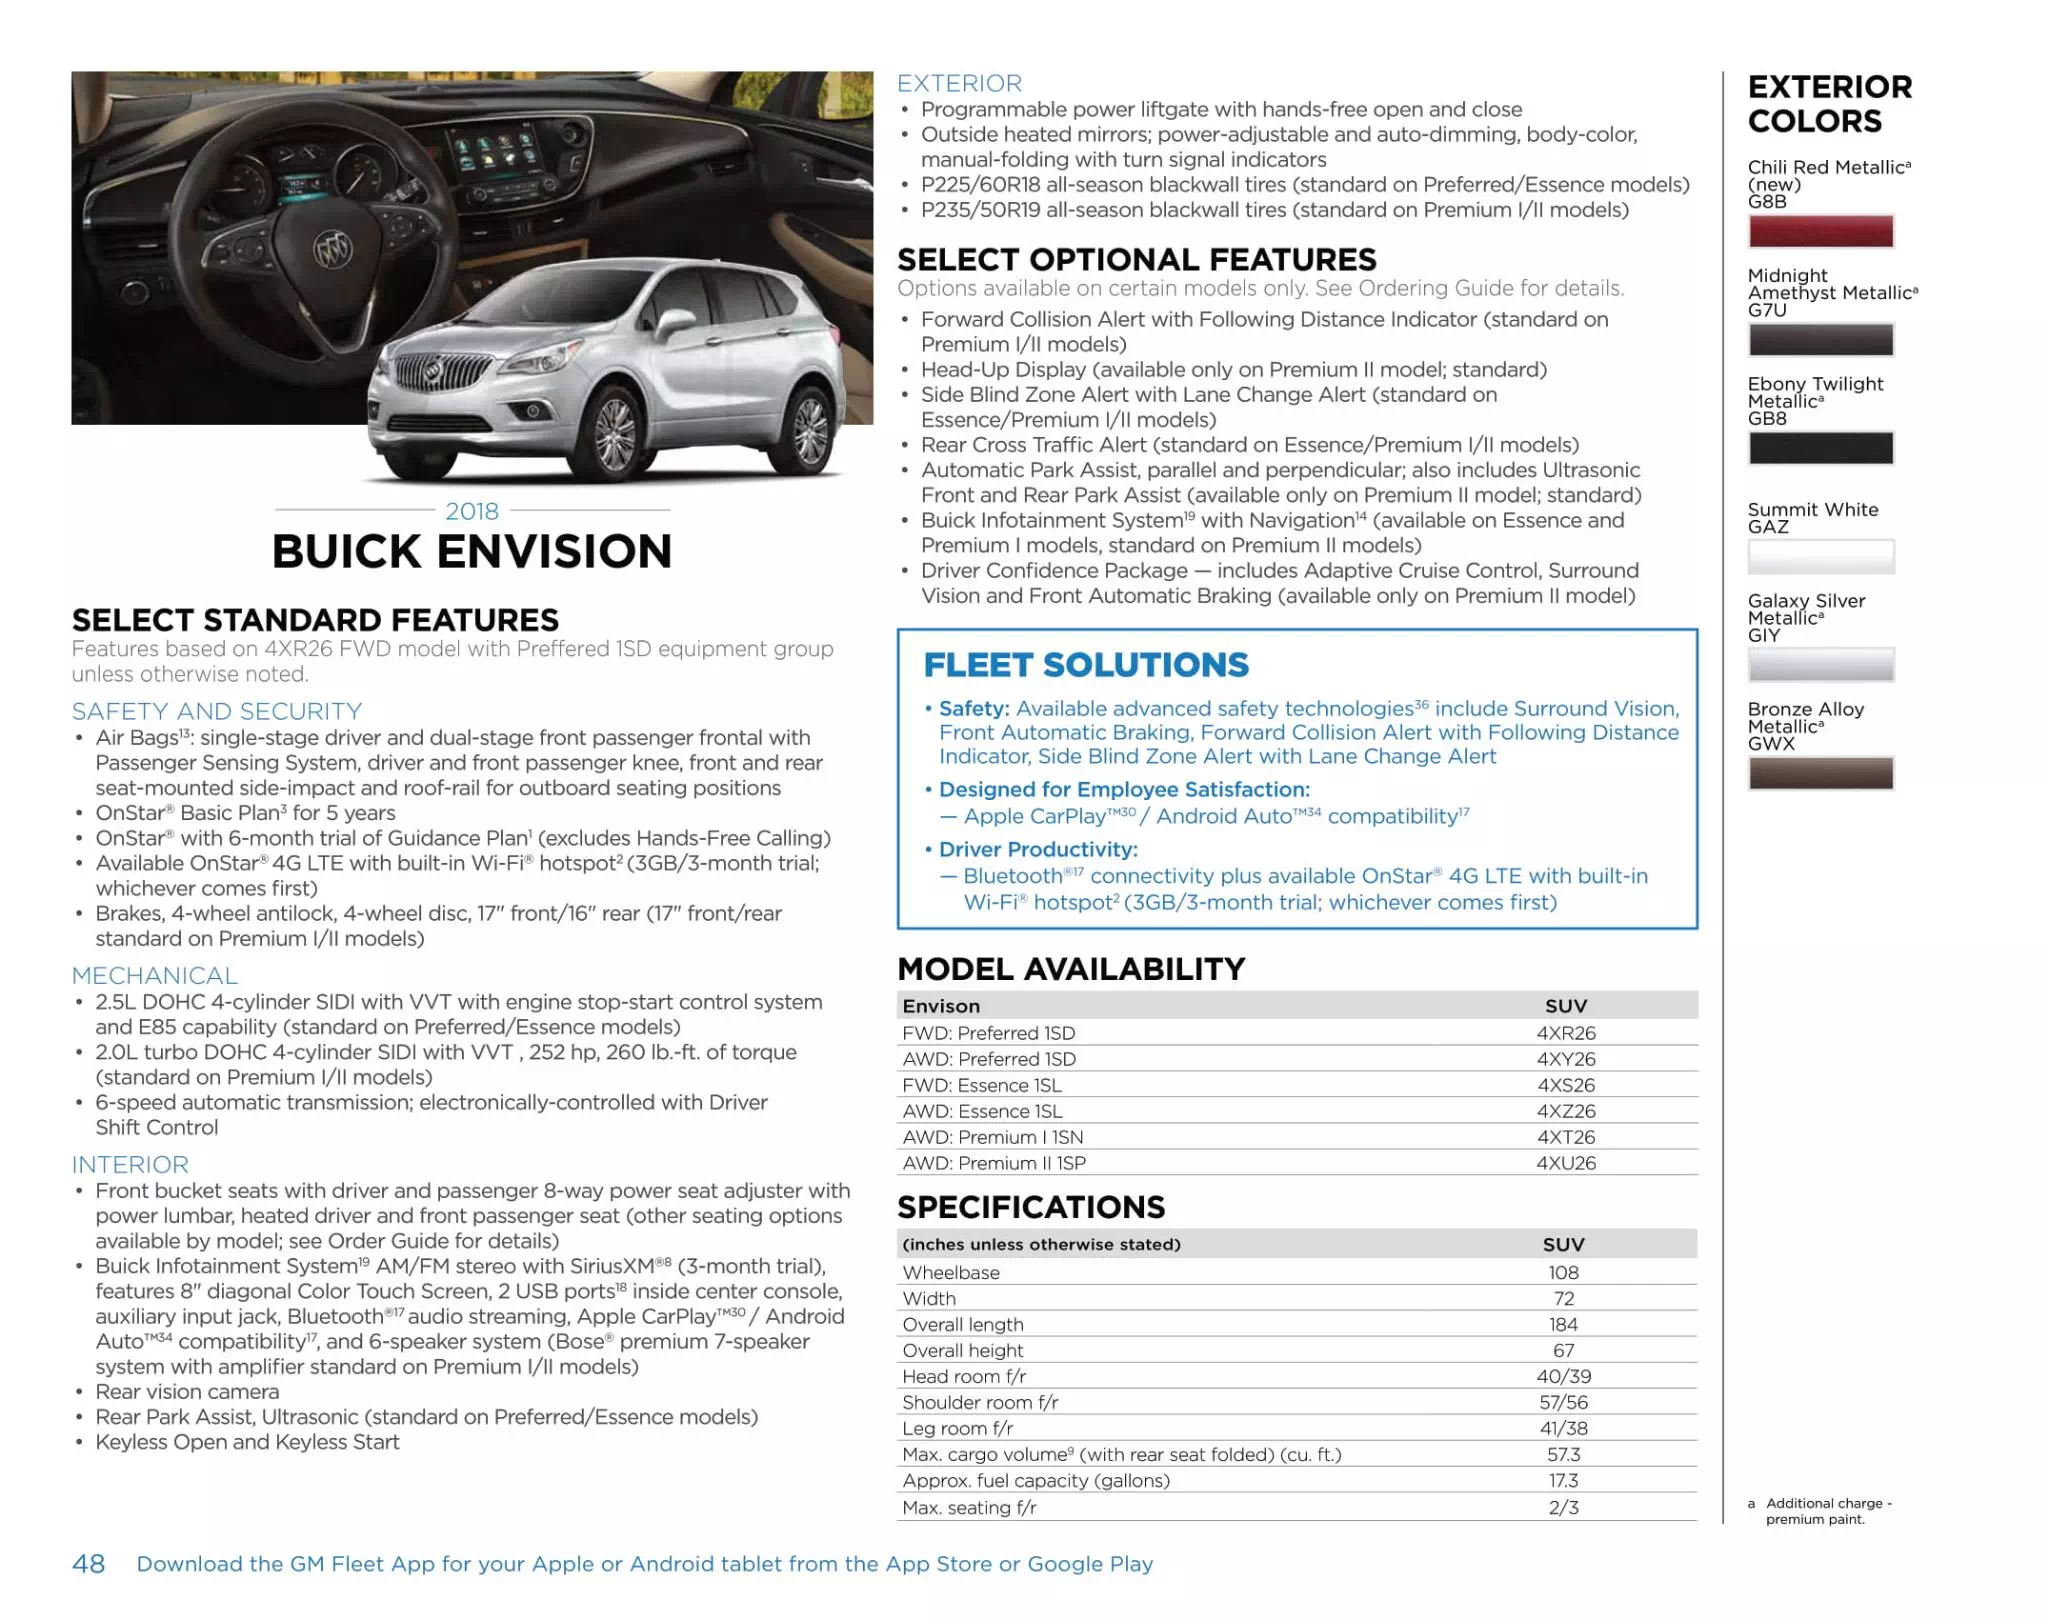 General Motors Sell sheet for Buick Envision Models, and Color Codes in 2018